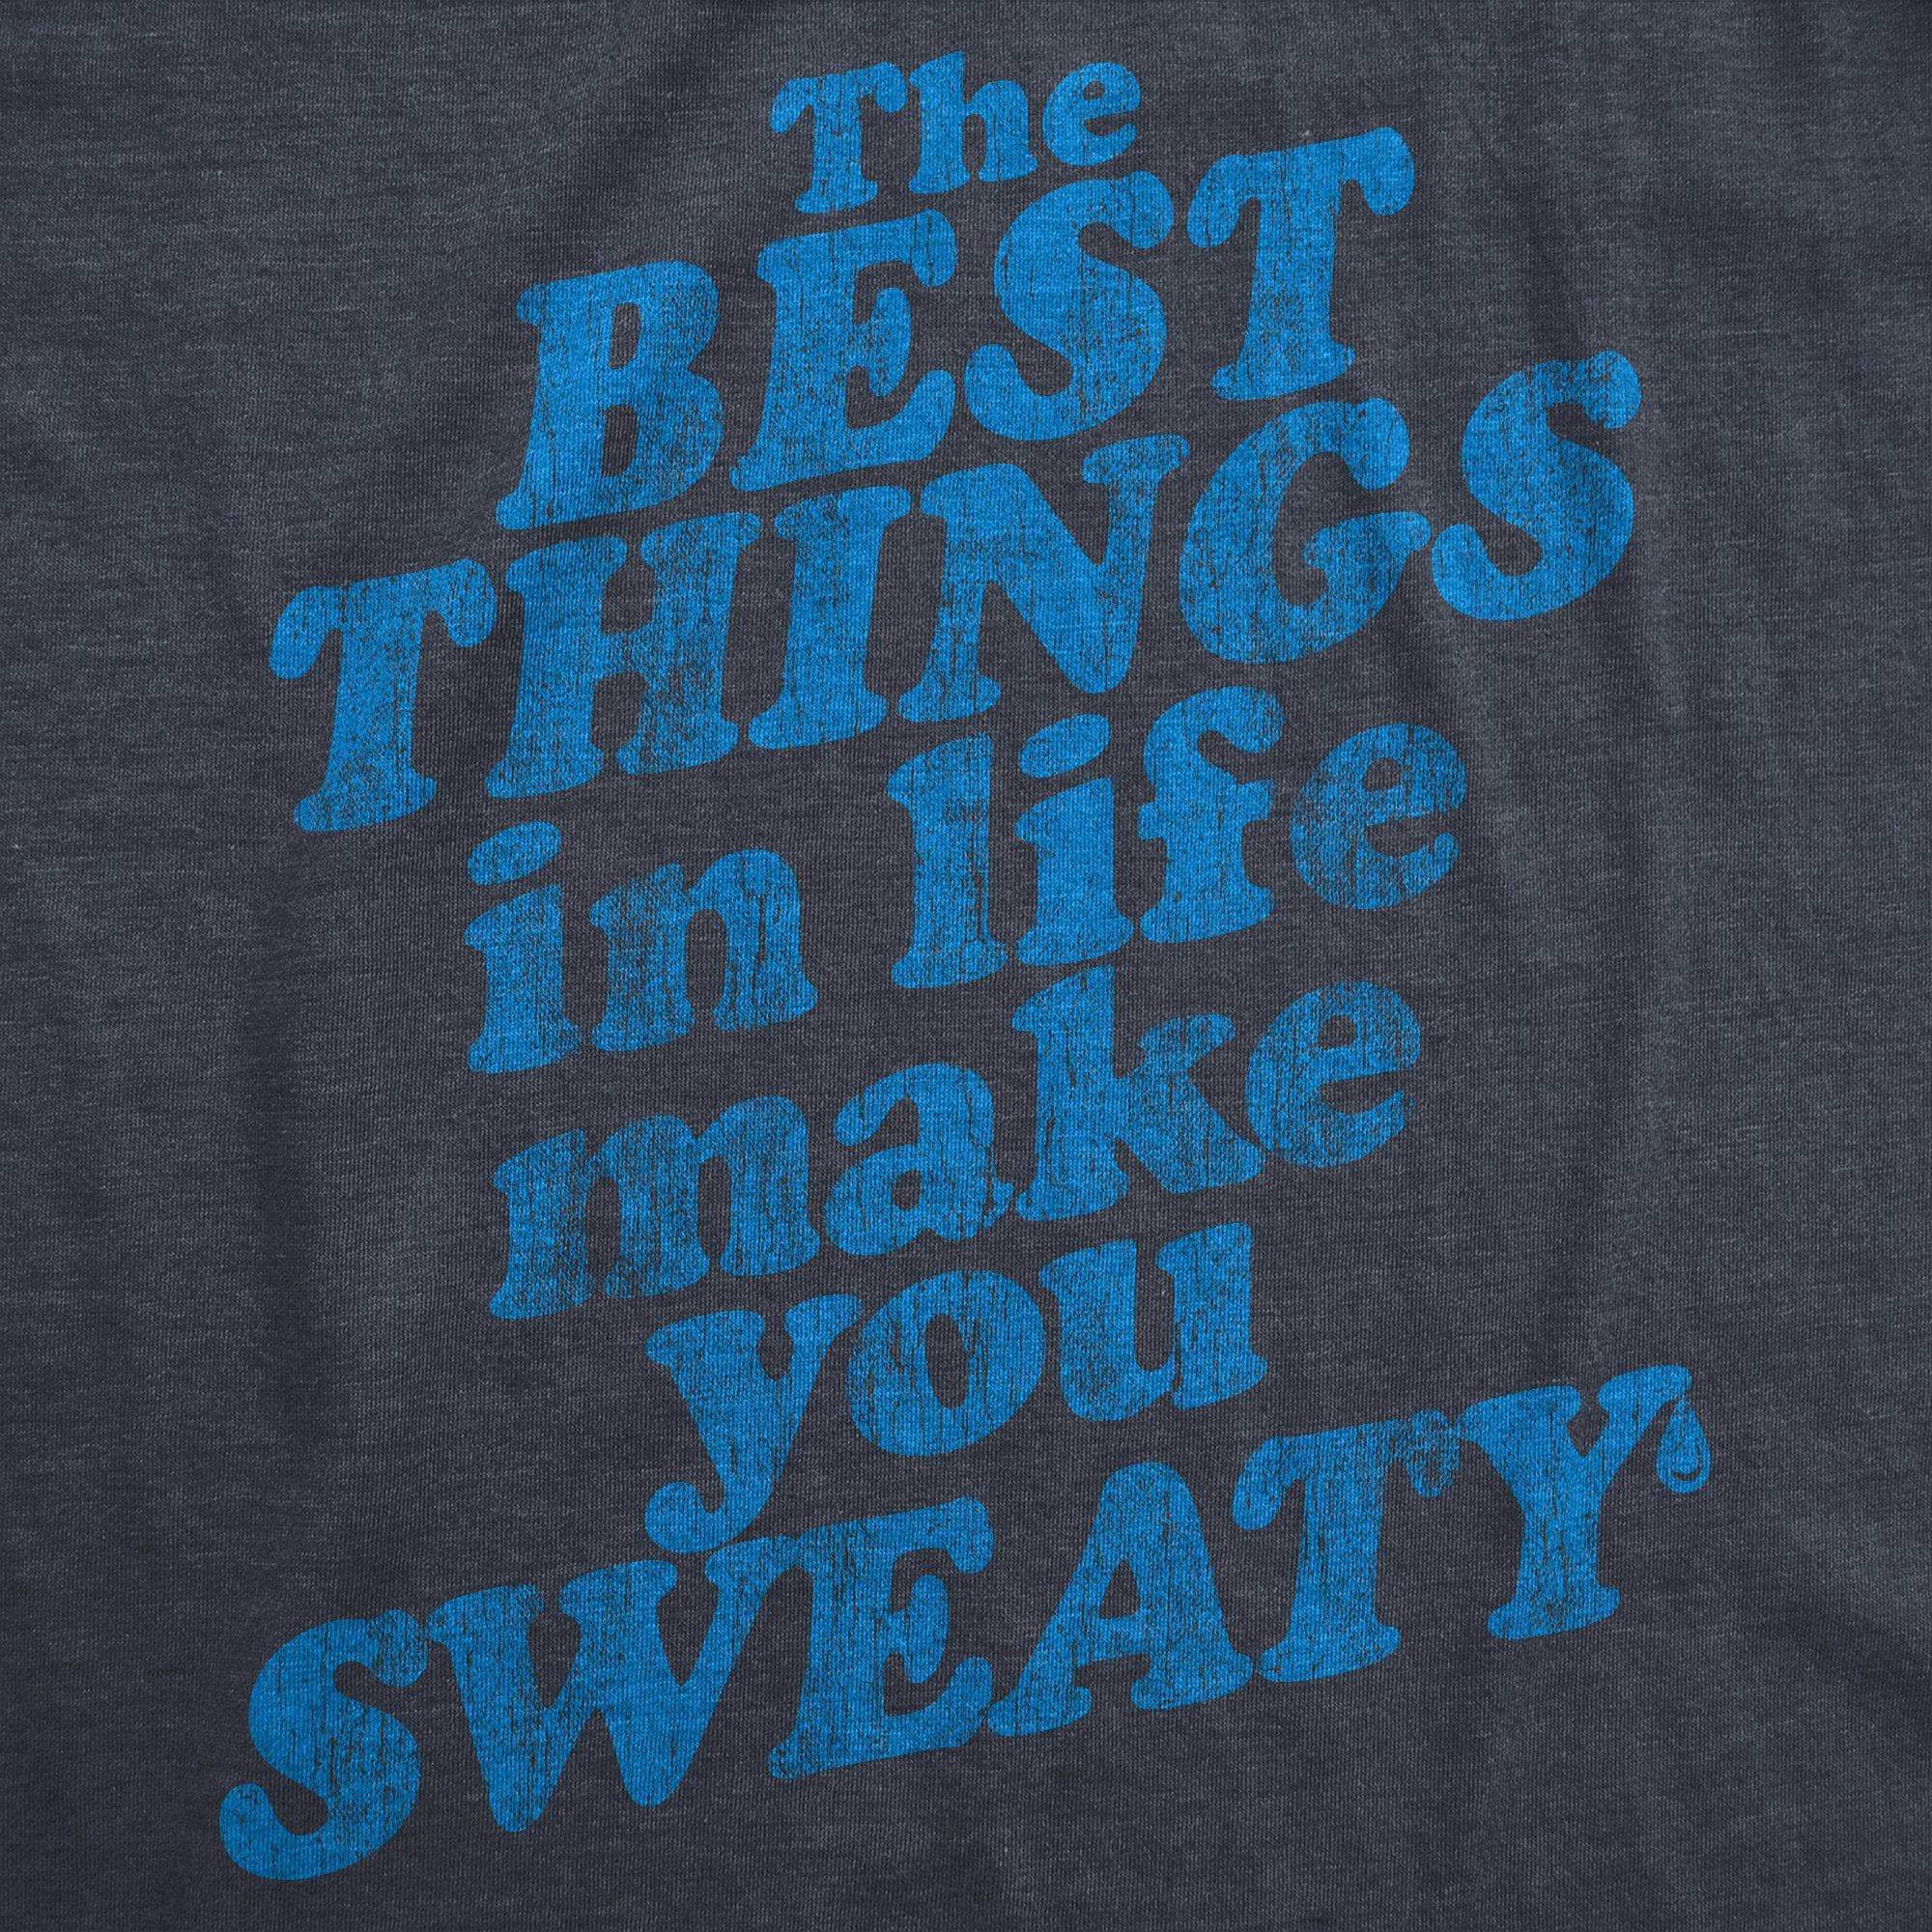 The Best Things In Life Make You Sweat Women's Tshirt - Crazy Dog T-Shirts